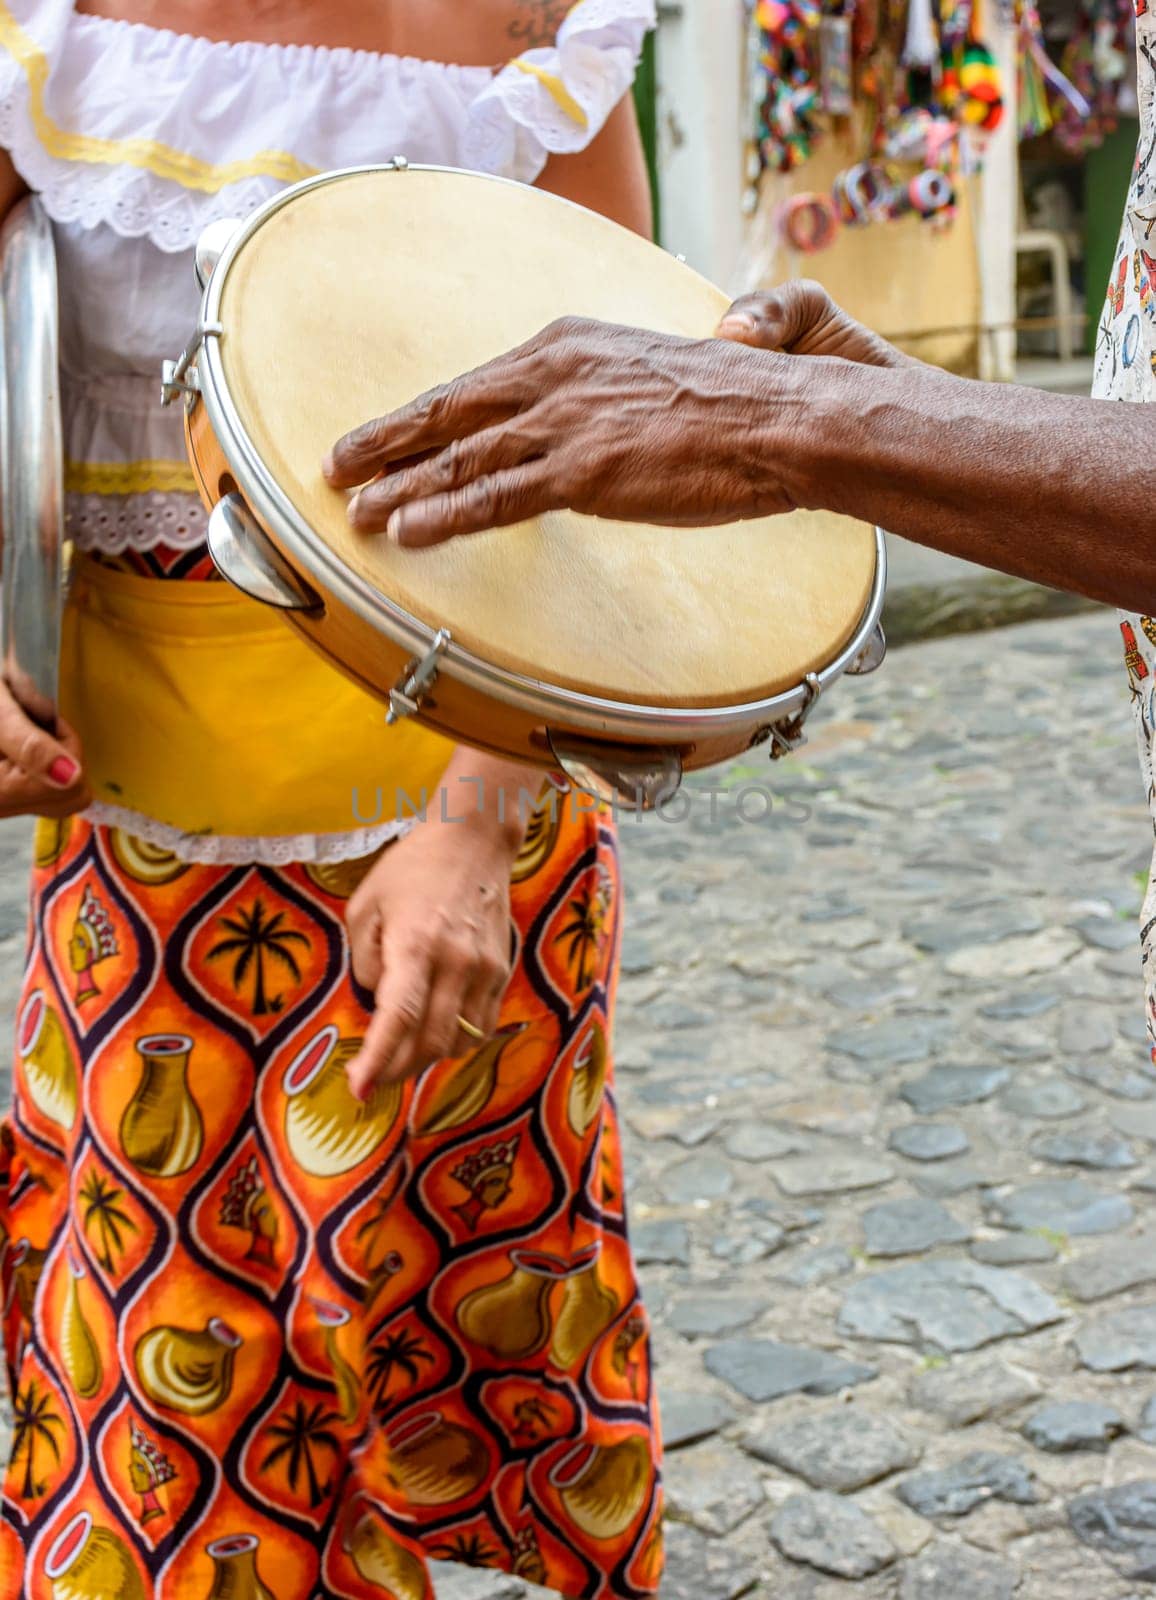 Tambourine player with a woman in typical clothes dancing in the background in the streets of the Pelourinho district in Salvador, Bahia